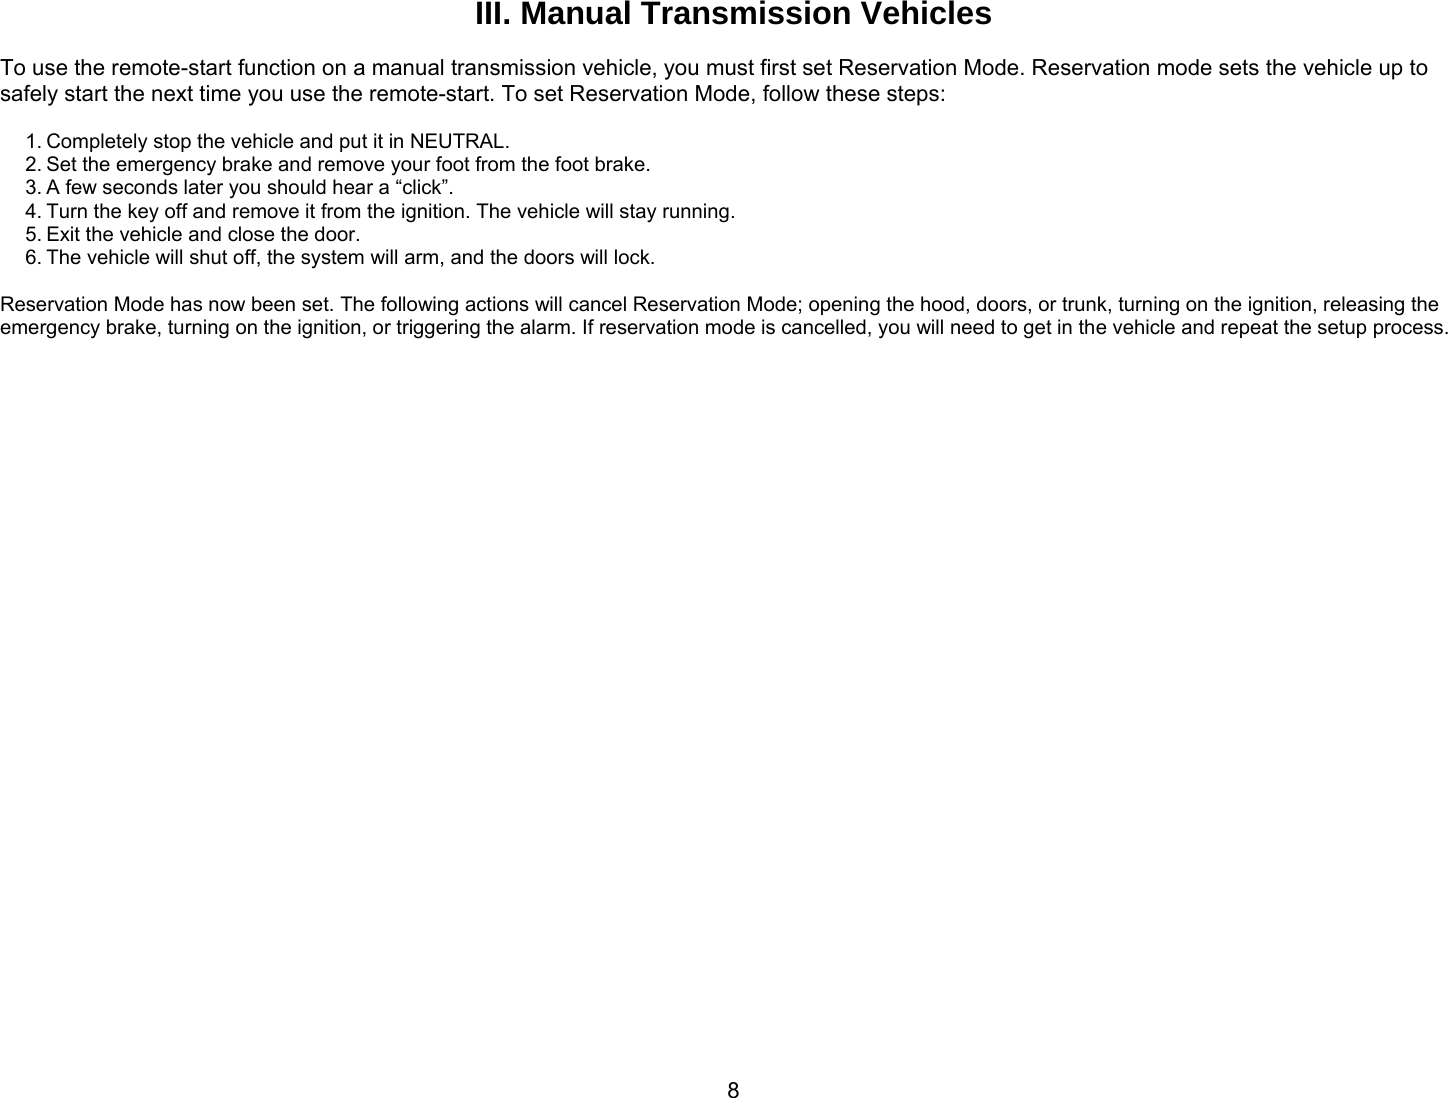       8III. Manual Transmission Vehicles  To use the remote-start function on a manual transmission vehicle, you must first set Reservation Mode. Reservation mode sets the vehicle up to safely start the next time you use the remote-start. To set Reservation Mode, follow these steps:  1. Completely stop the vehicle and put it in NEUTRAL. 2. Set the emergency brake and remove your foot from the foot brake. 3. A few seconds later you should hear a “click”. 4. Turn the key off and remove it from the ignition. The vehicle will stay running. 5. Exit the vehicle and close the door. 6. The vehicle will shut off, the system will arm, and the doors will lock.  Reservation Mode has now been set. The following actions will cancel Reservation Mode; opening the hood, doors, or trunk, turning on the ignition, releasing the emergency brake, turning on the ignition, or triggering the alarm. If reservation mode is cancelled, you will need to get in the vehicle and repeat the setup process.   